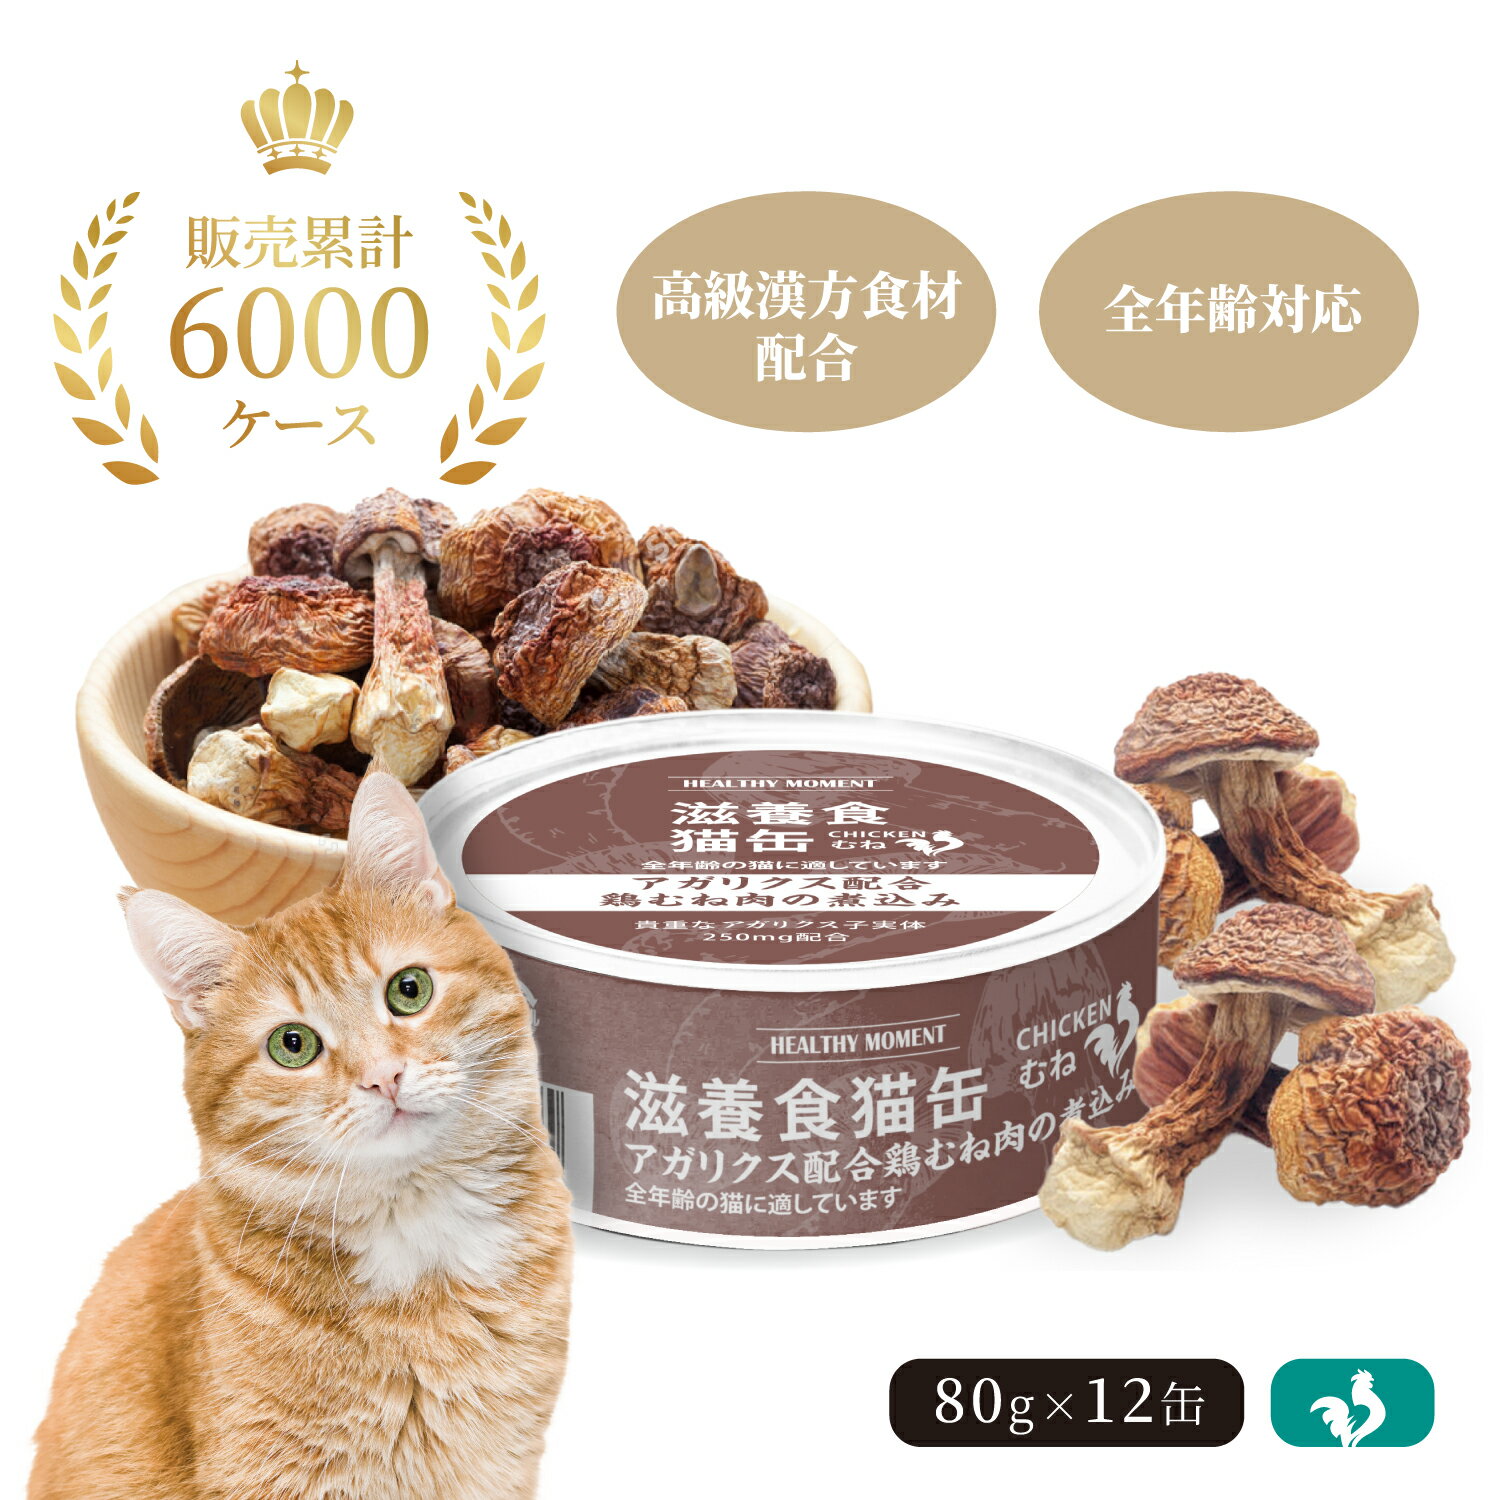 Healthy Moment 滋養食 猫缶 全年齢 アガ